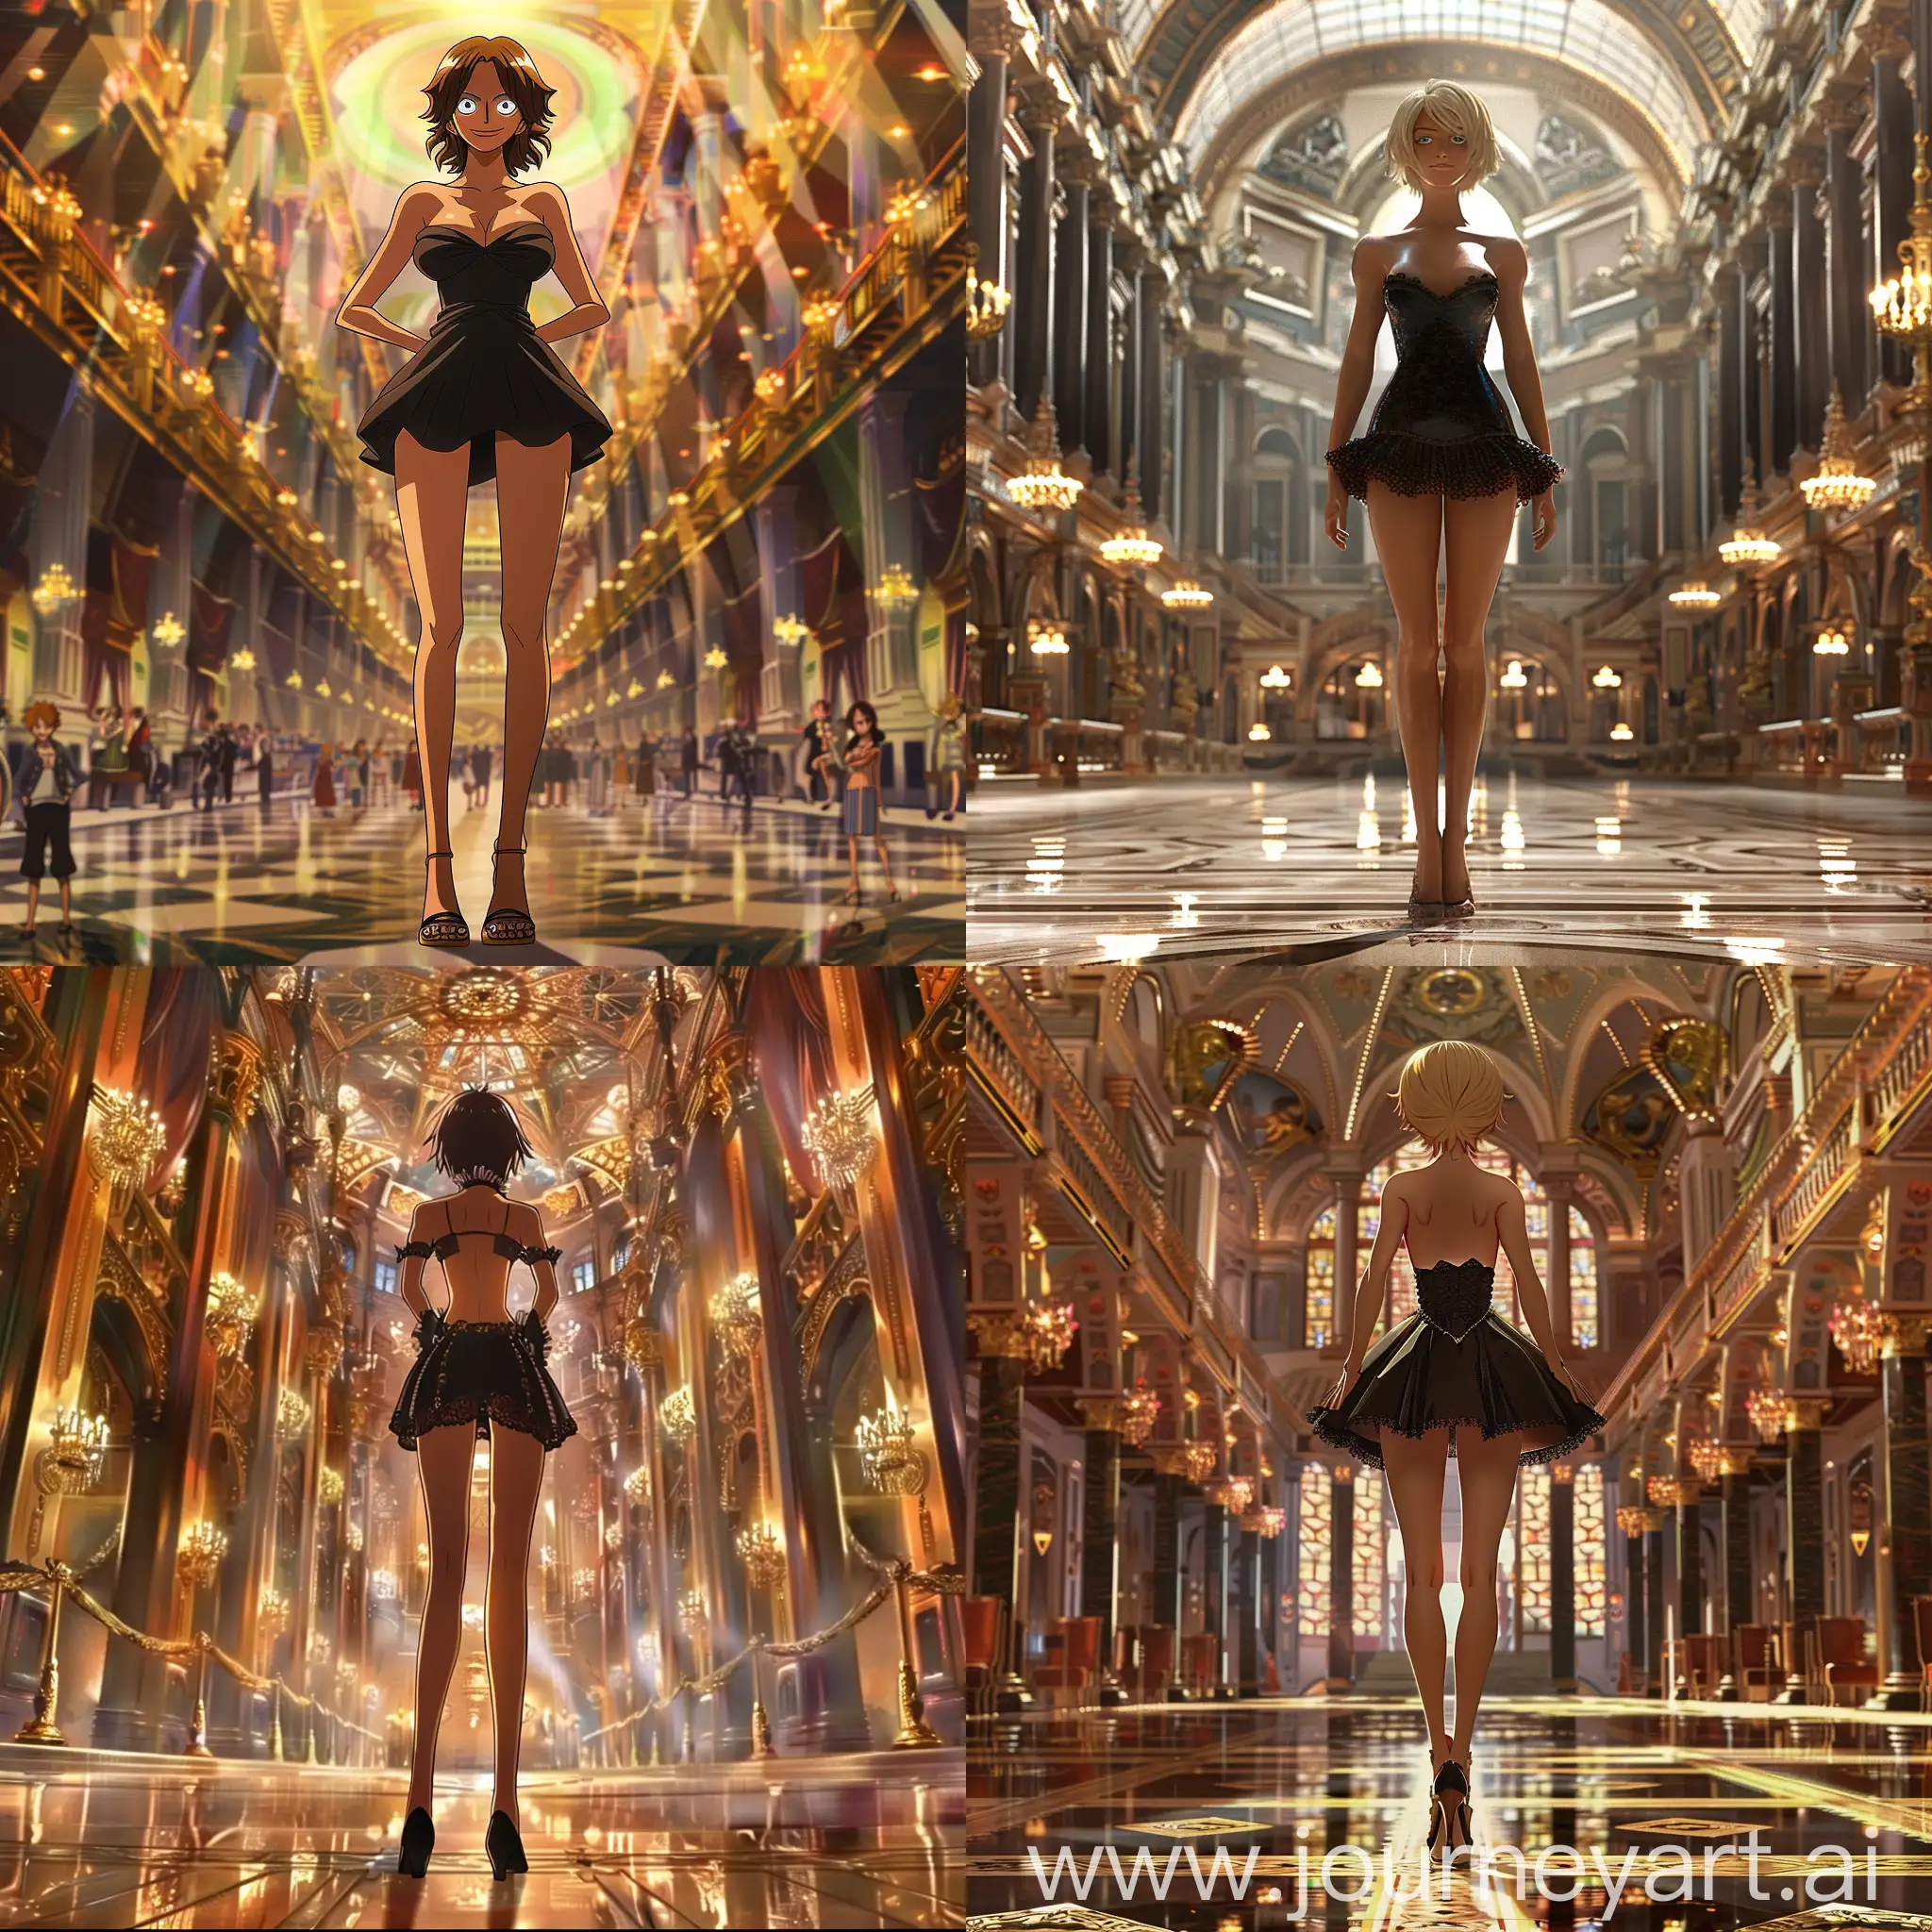 Hancock from one piece dressed in a short elegant black dress standing in the middle of a big hall, fancy background